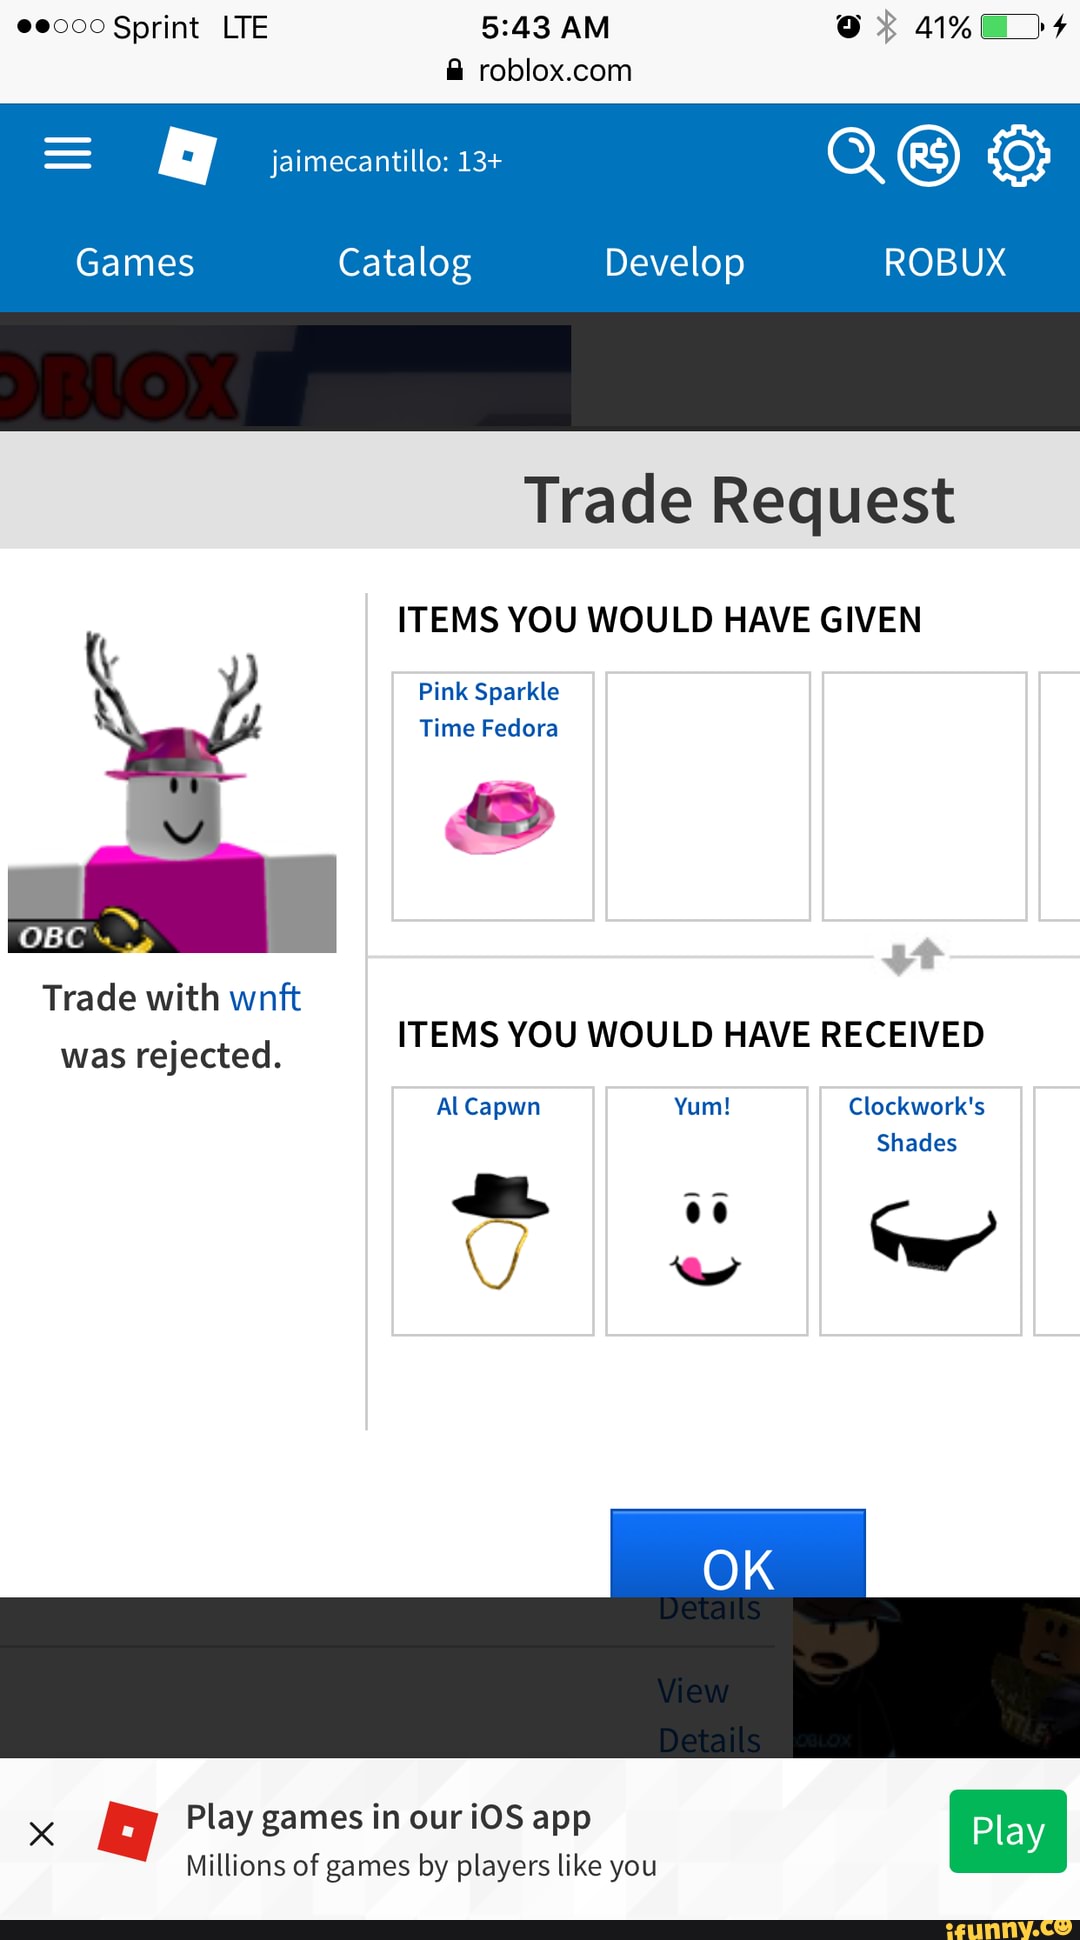 485k lost :( - Games Catalog Develop ROBUX Trade Request ITEMS YOU WOULD  HAVE GIVEN Pink Sparkle Time Fedora Trade with wnft was rejected. ITEMS YOU  WOULD HAVE RECEIVED Al Capwn Yum!